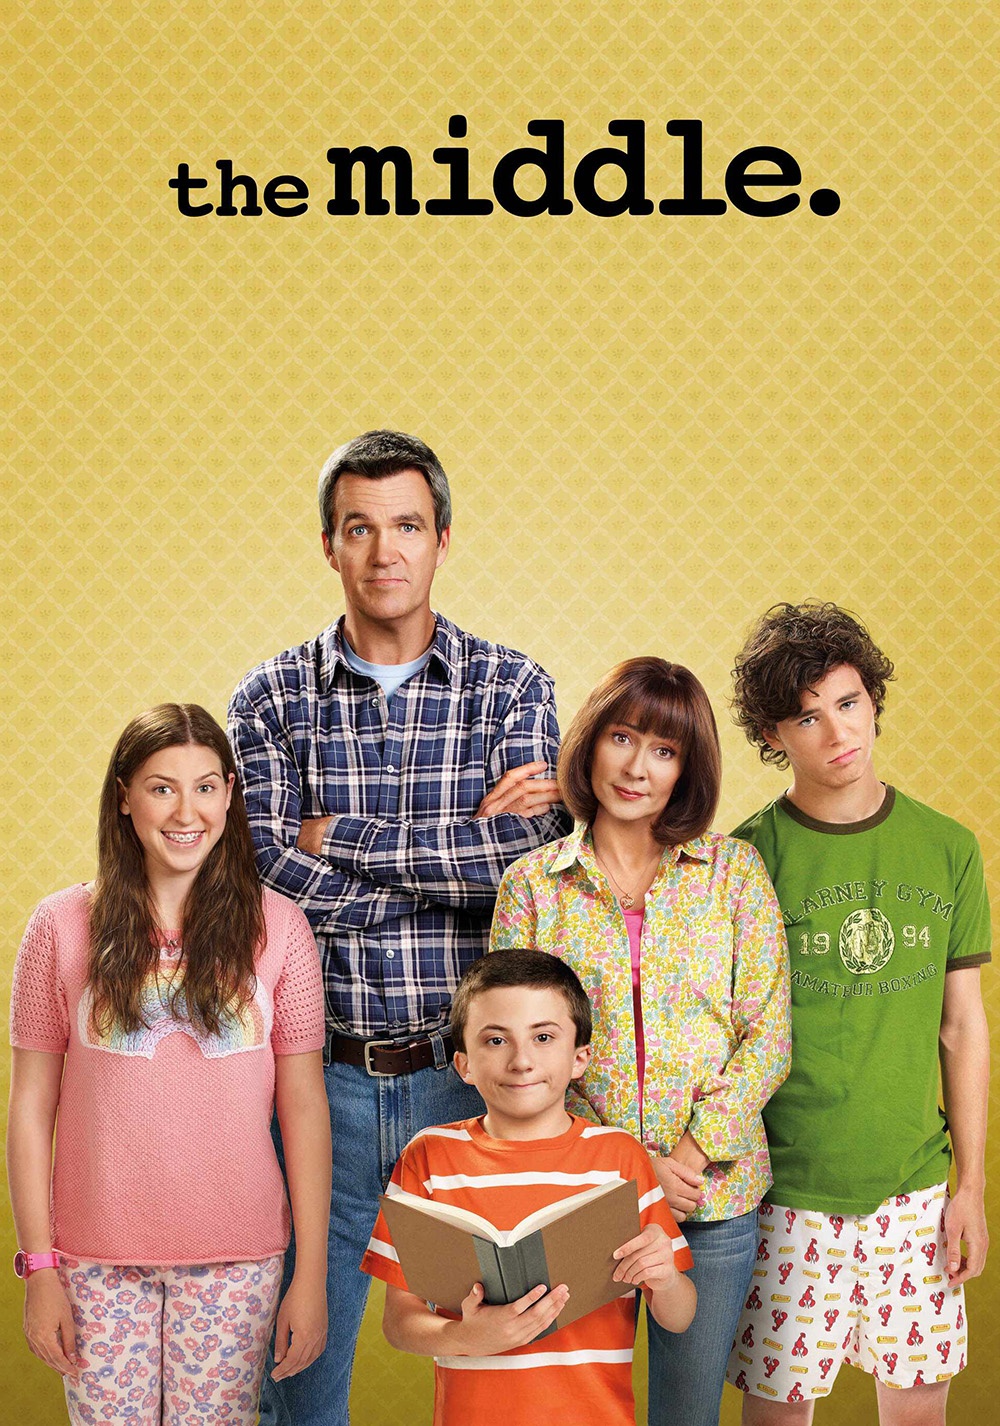 Why American Sitcom “The Middle” is One of the Best Family Comedies Ever 6